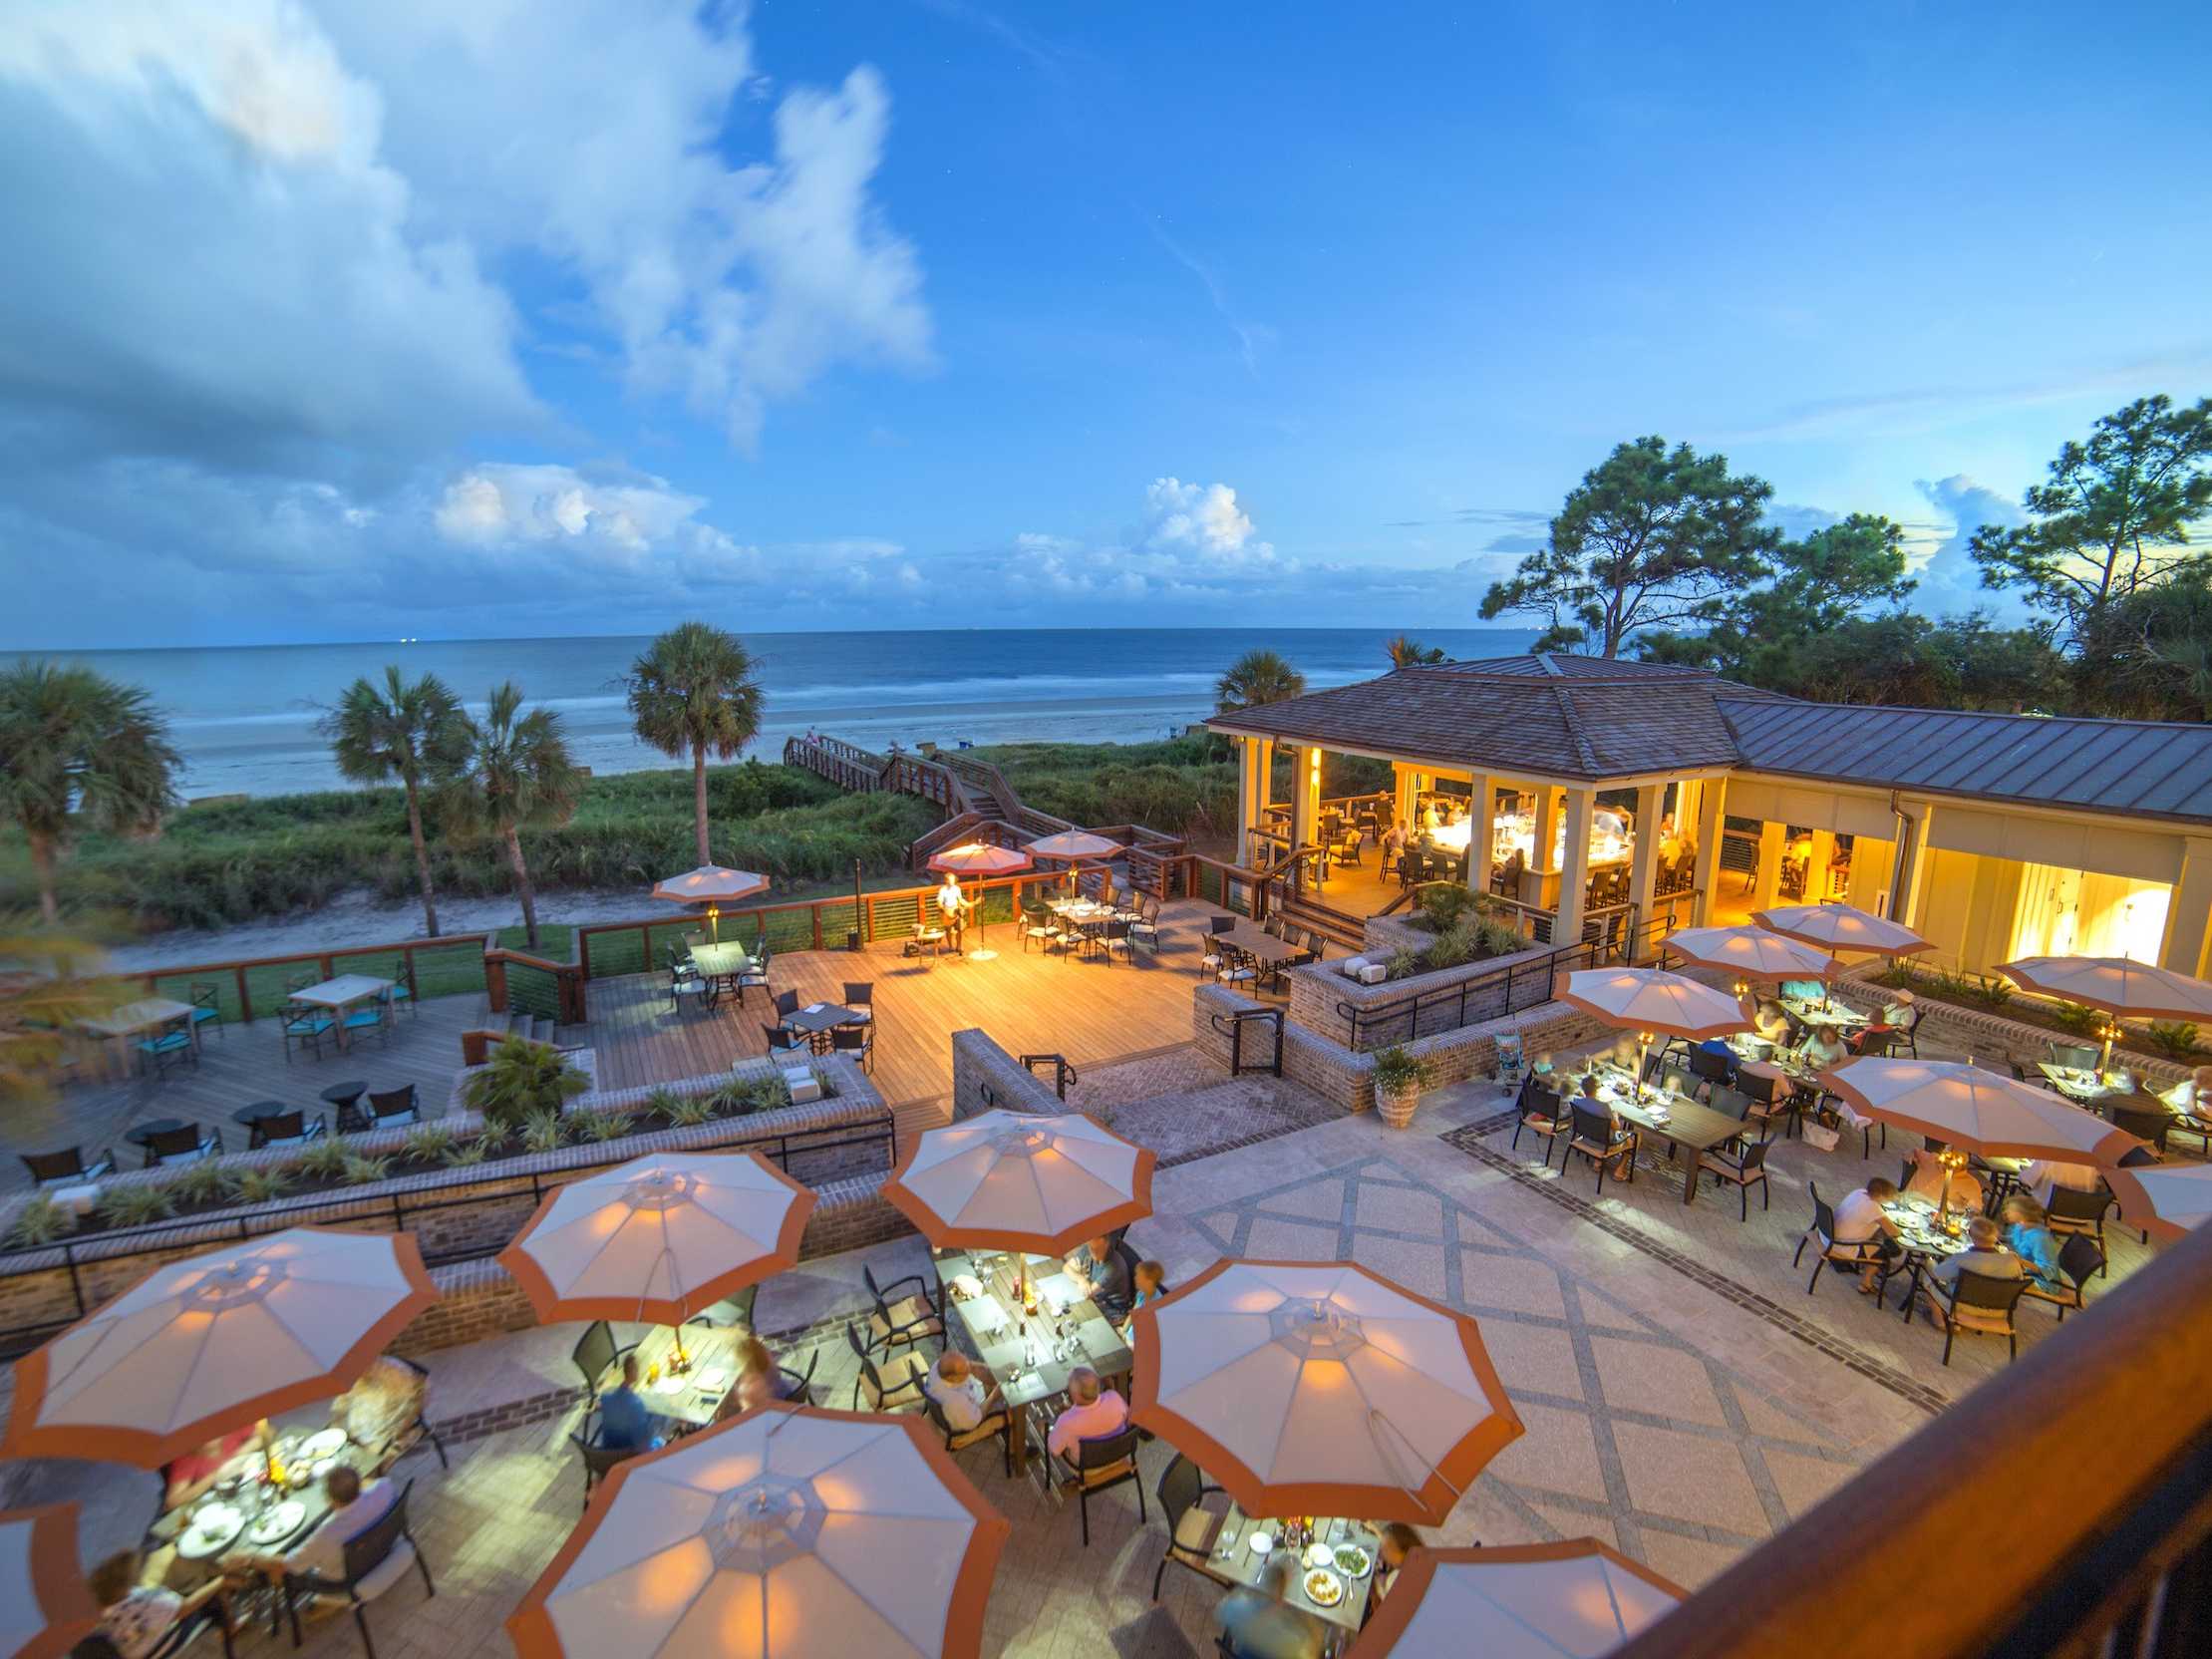 the-best-outdoor-dining-restaurants-in-america-according-to-opentable